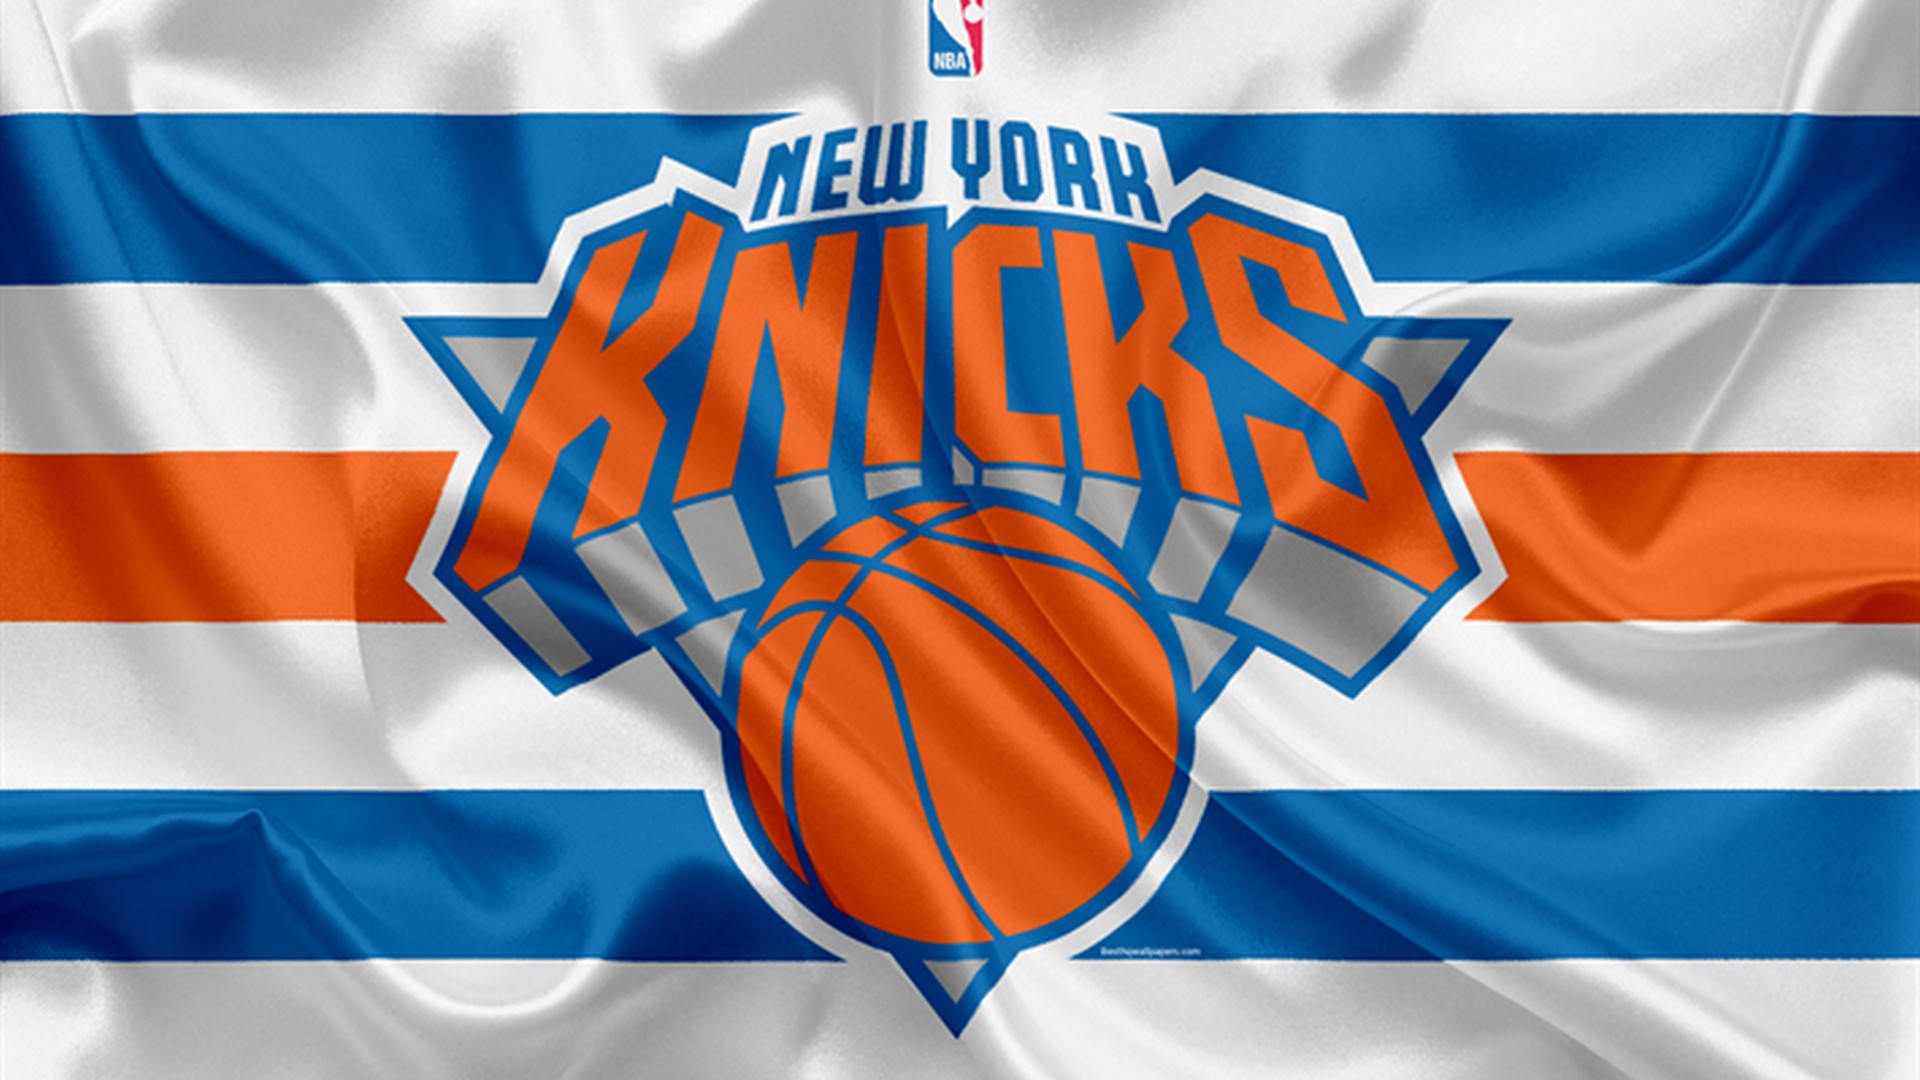 Wallpapers HD New York Knicks with image dimensions 1920x1080 pixel. You can make this wallpaper for your Desktop Computer Backgrounds, Windows or Mac Screensavers, iPhone Lock screen, Tablet or Android and another Mobile Phone device